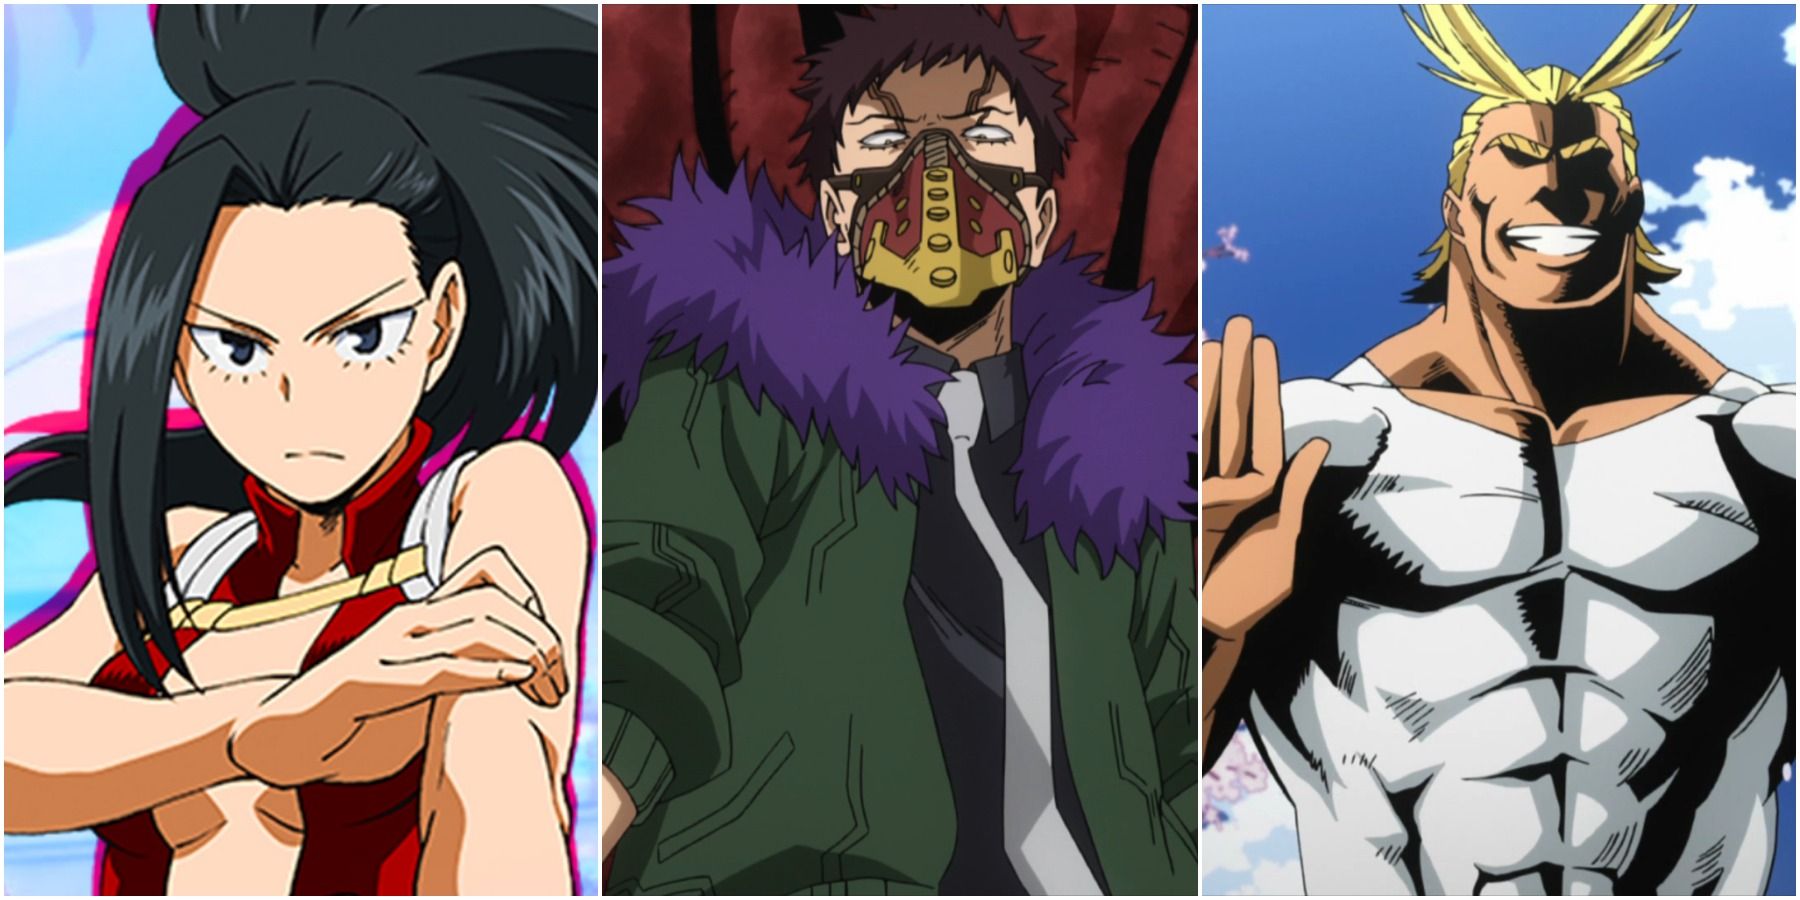 Momo, Overhaul, and All Might